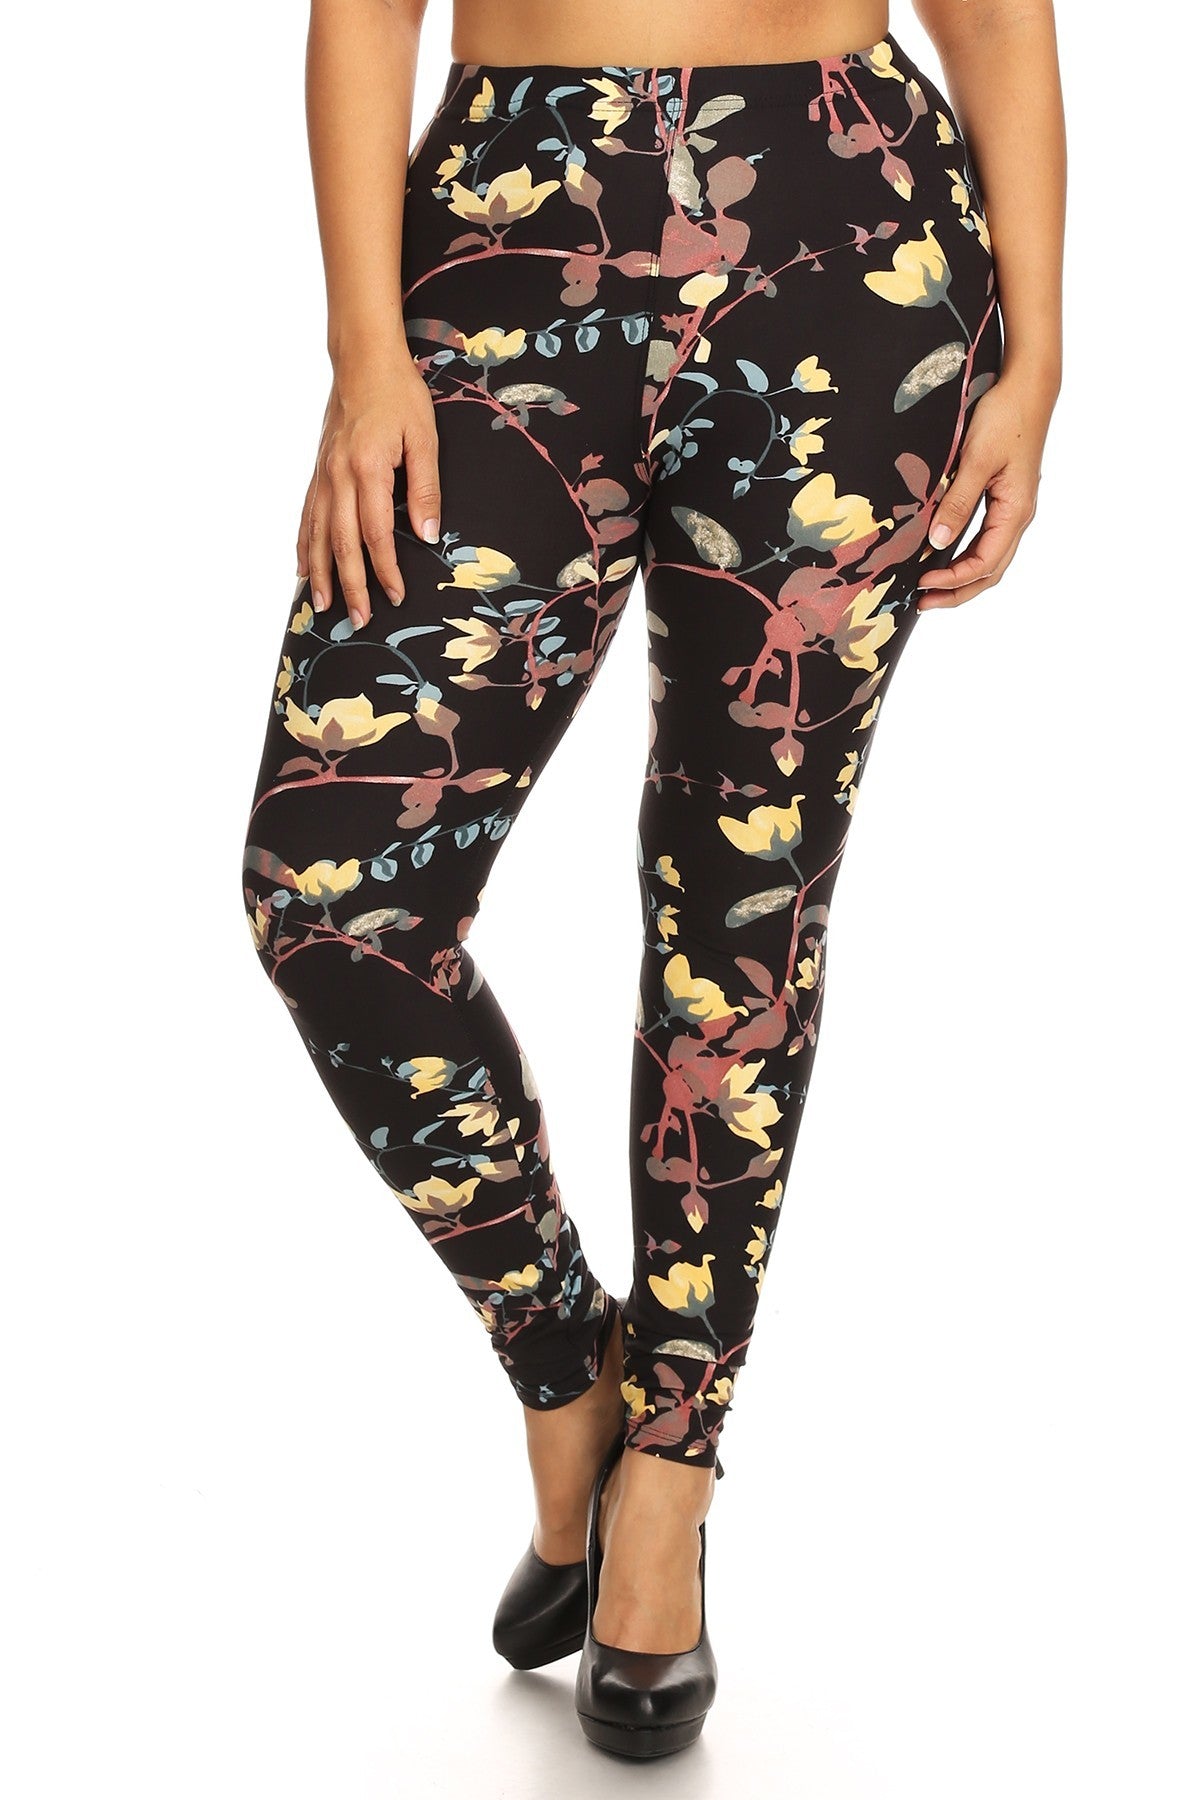 Plus Size Floral Print, Full Length Leggings In A Slim Fitting Style W –  Luxe Boutique LLC